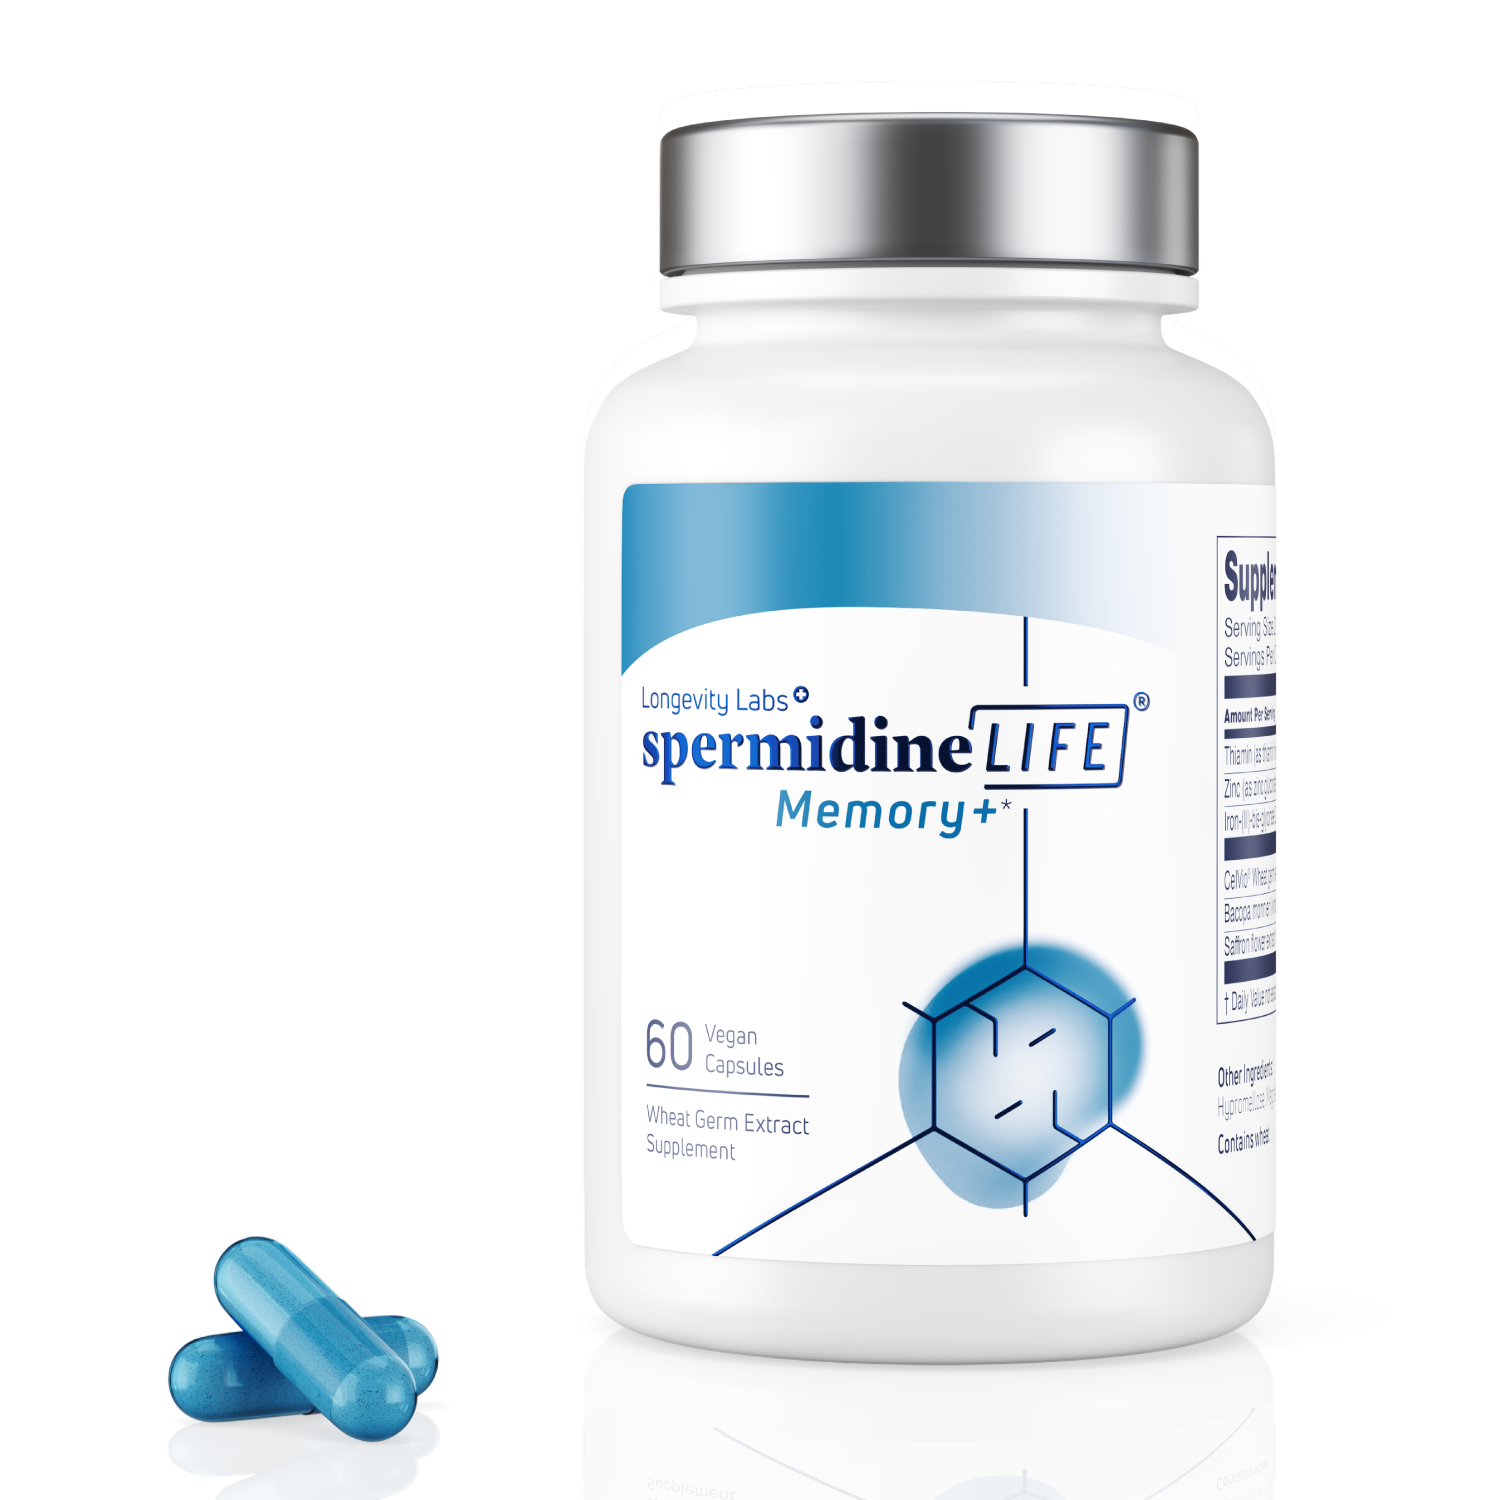 A bottle of spermidineLIFE® Memory+ 1300mg Dietary Supplement by spermidineLIFE® by Longevity Labs, Inc. on a white background.